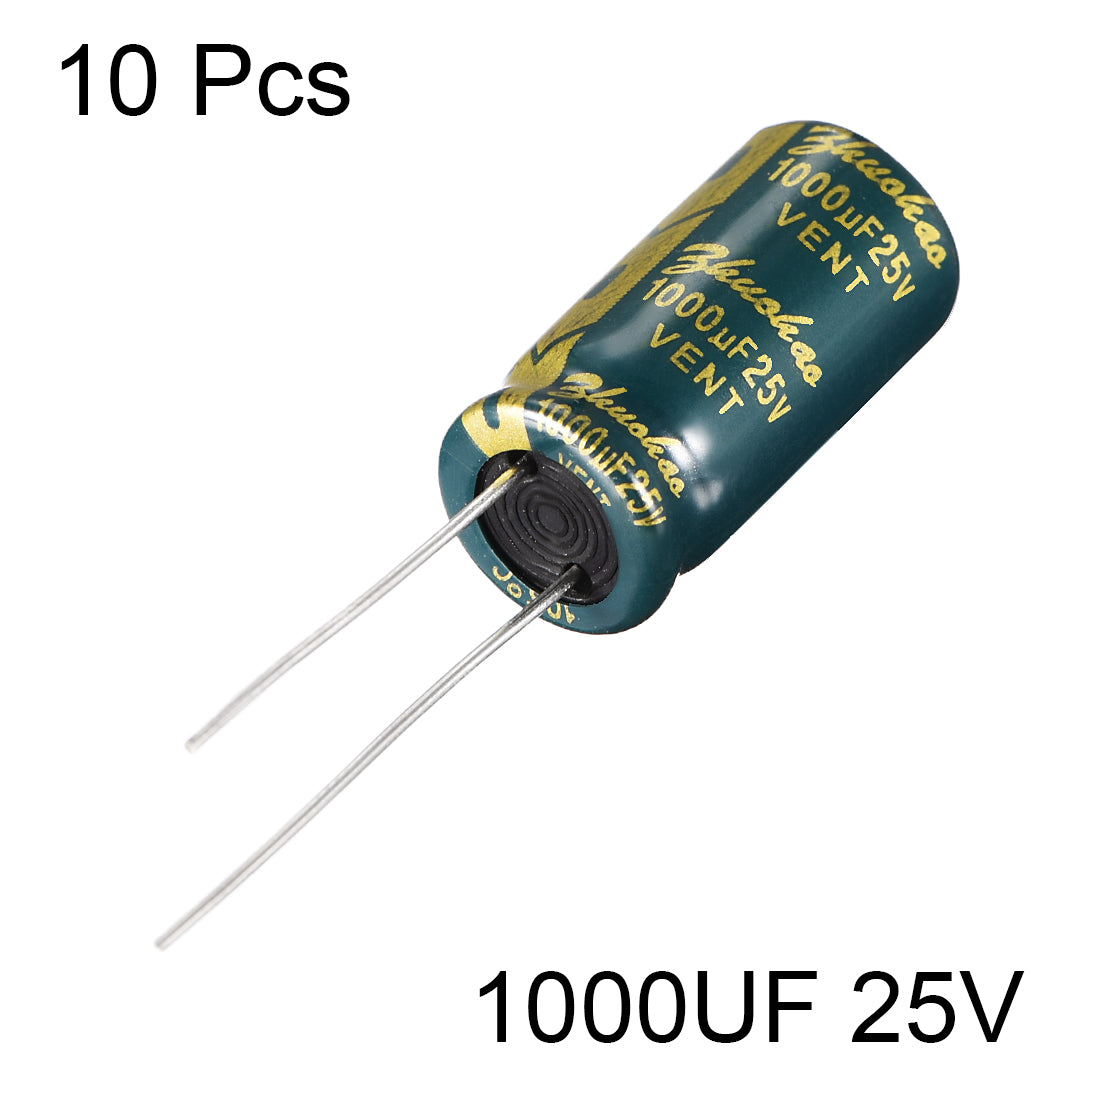 uxcell Uxcell Aluminum Radial Electrolytic Capacitor Low ESR Green with 1000UF 25V 105 Celsius Life 3000H 10 x 20 mm High Ripple Current,Low Impedance 10pcs